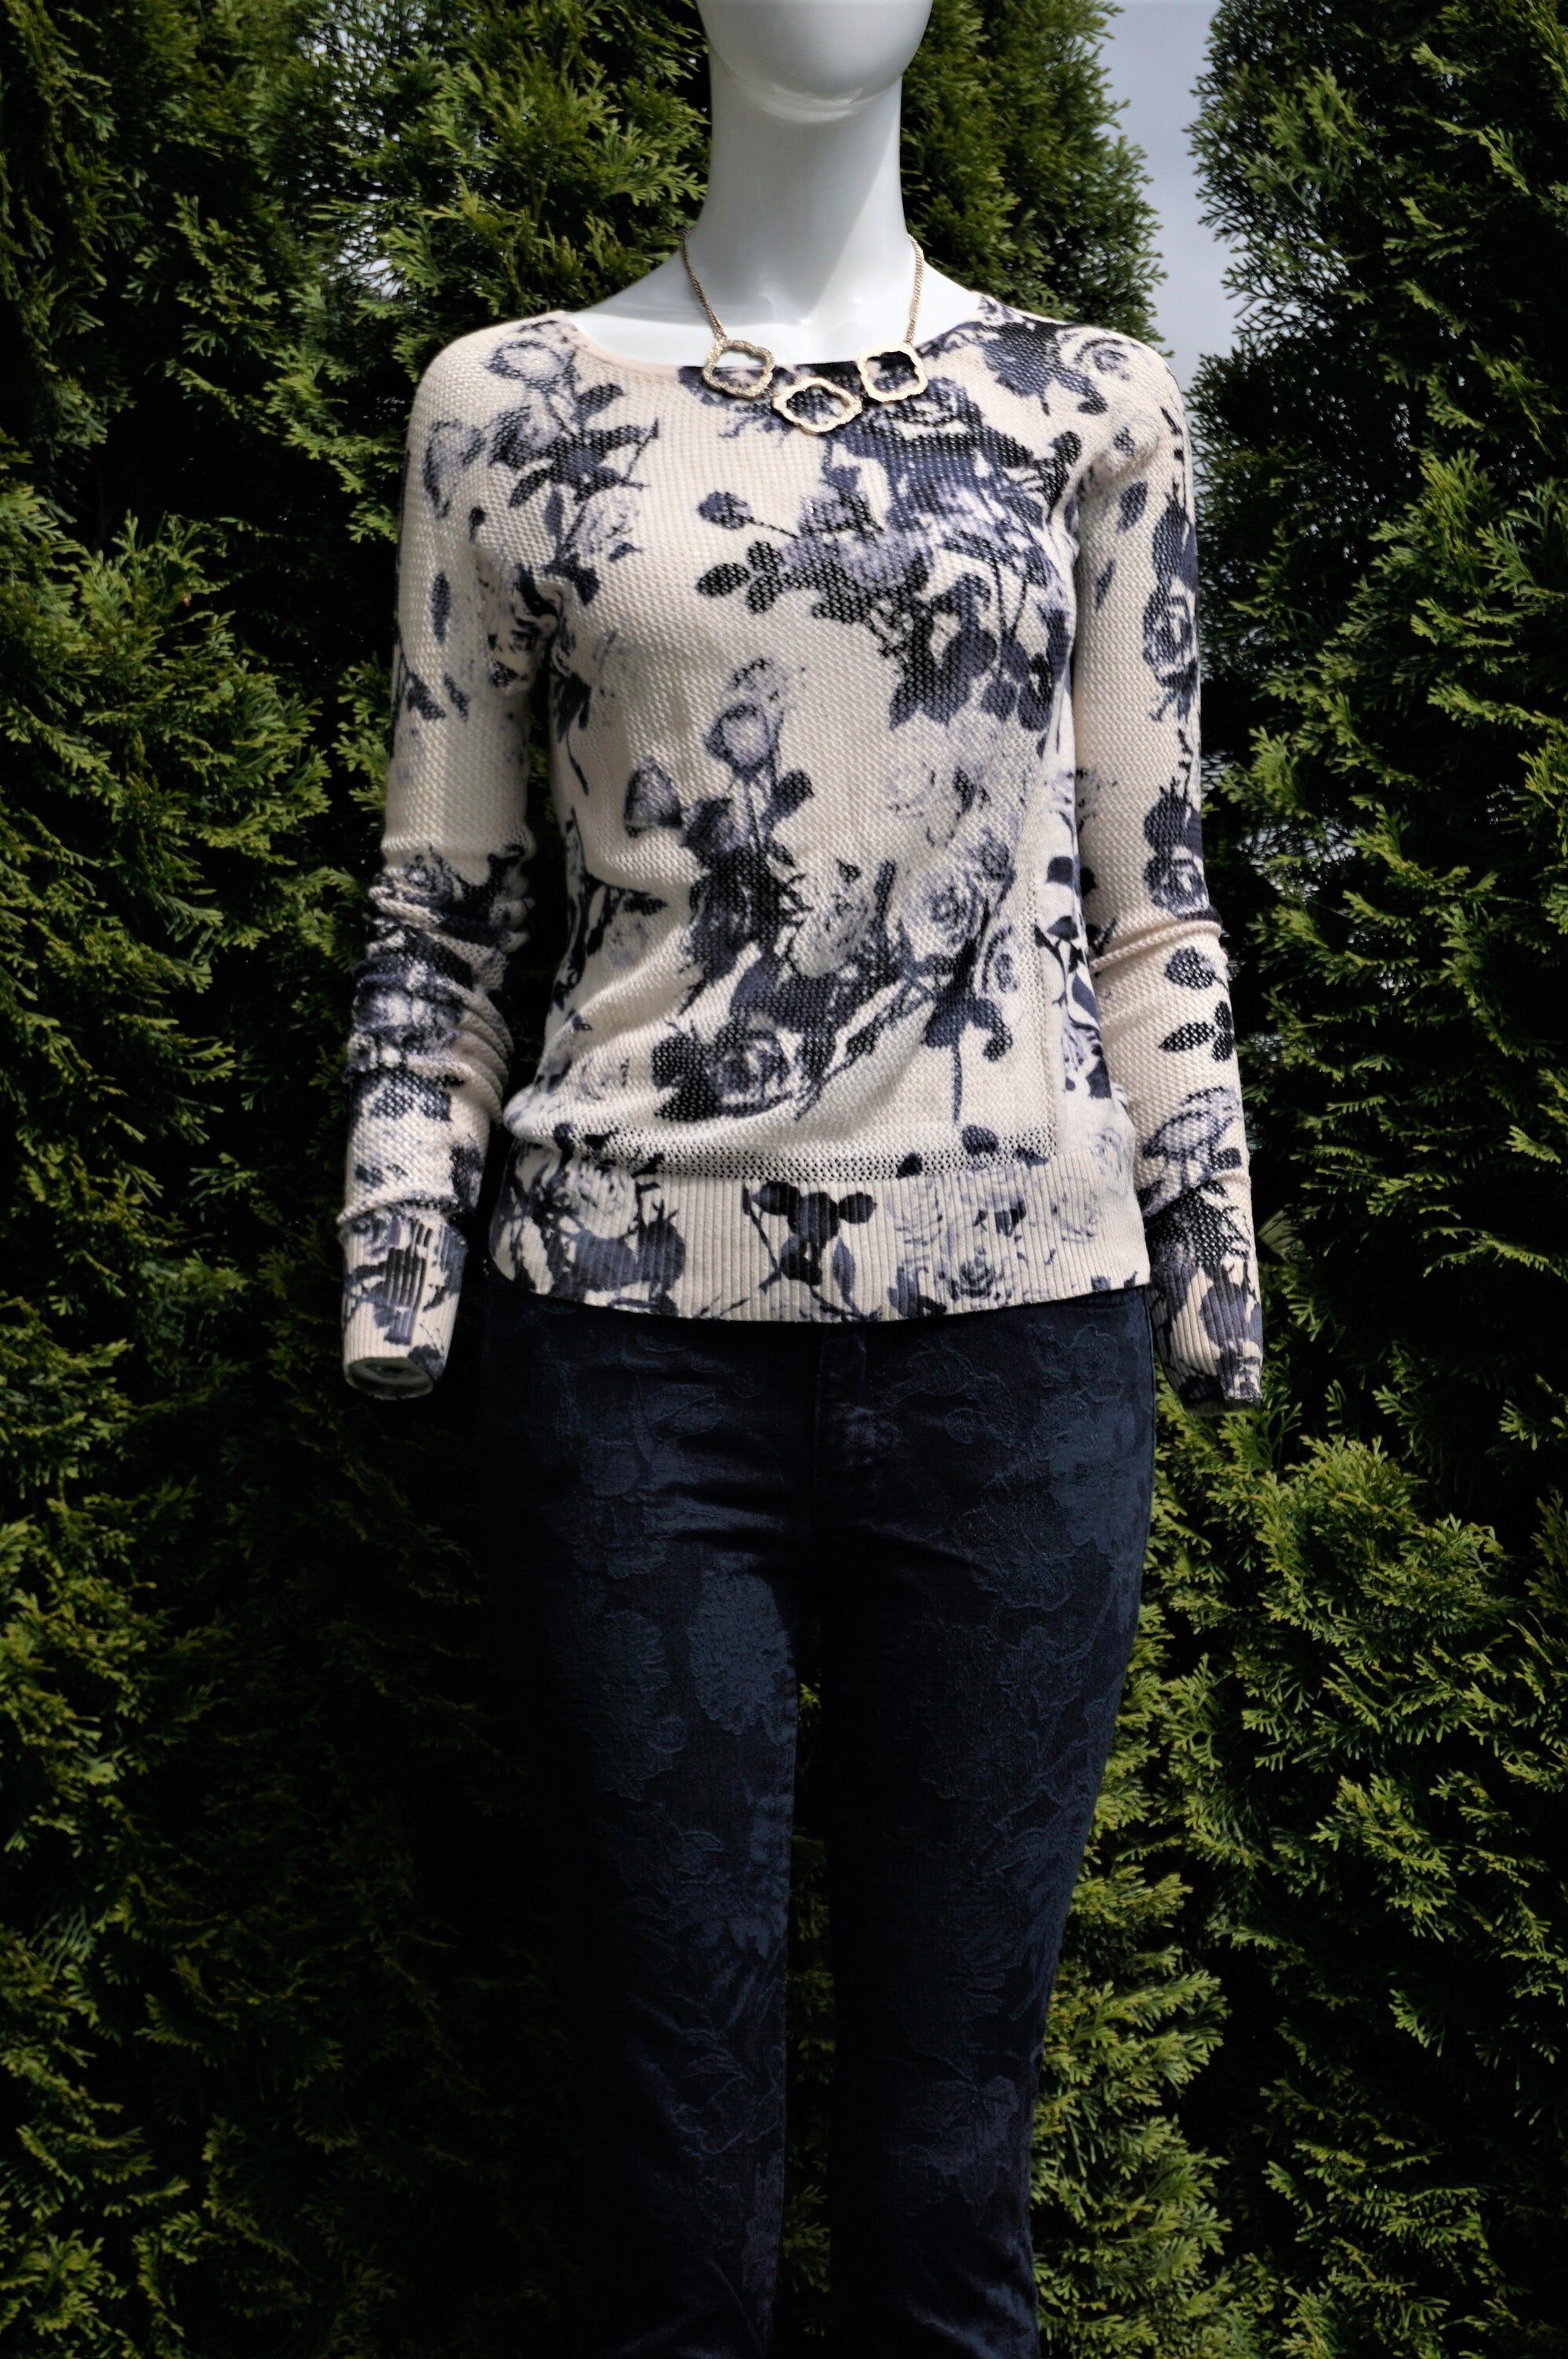 Silence & Noise Sweater Top, Thin sweater top with floral prints for your casual outing on a chily day., White, Blue, 100% cotton, women's Tops, women's White, Blue Tops, Silence & Noise women's Tops, Urban Outfitter sweater top with sabrina neckline, floral sweater top, spring floral sabrina neck sweater